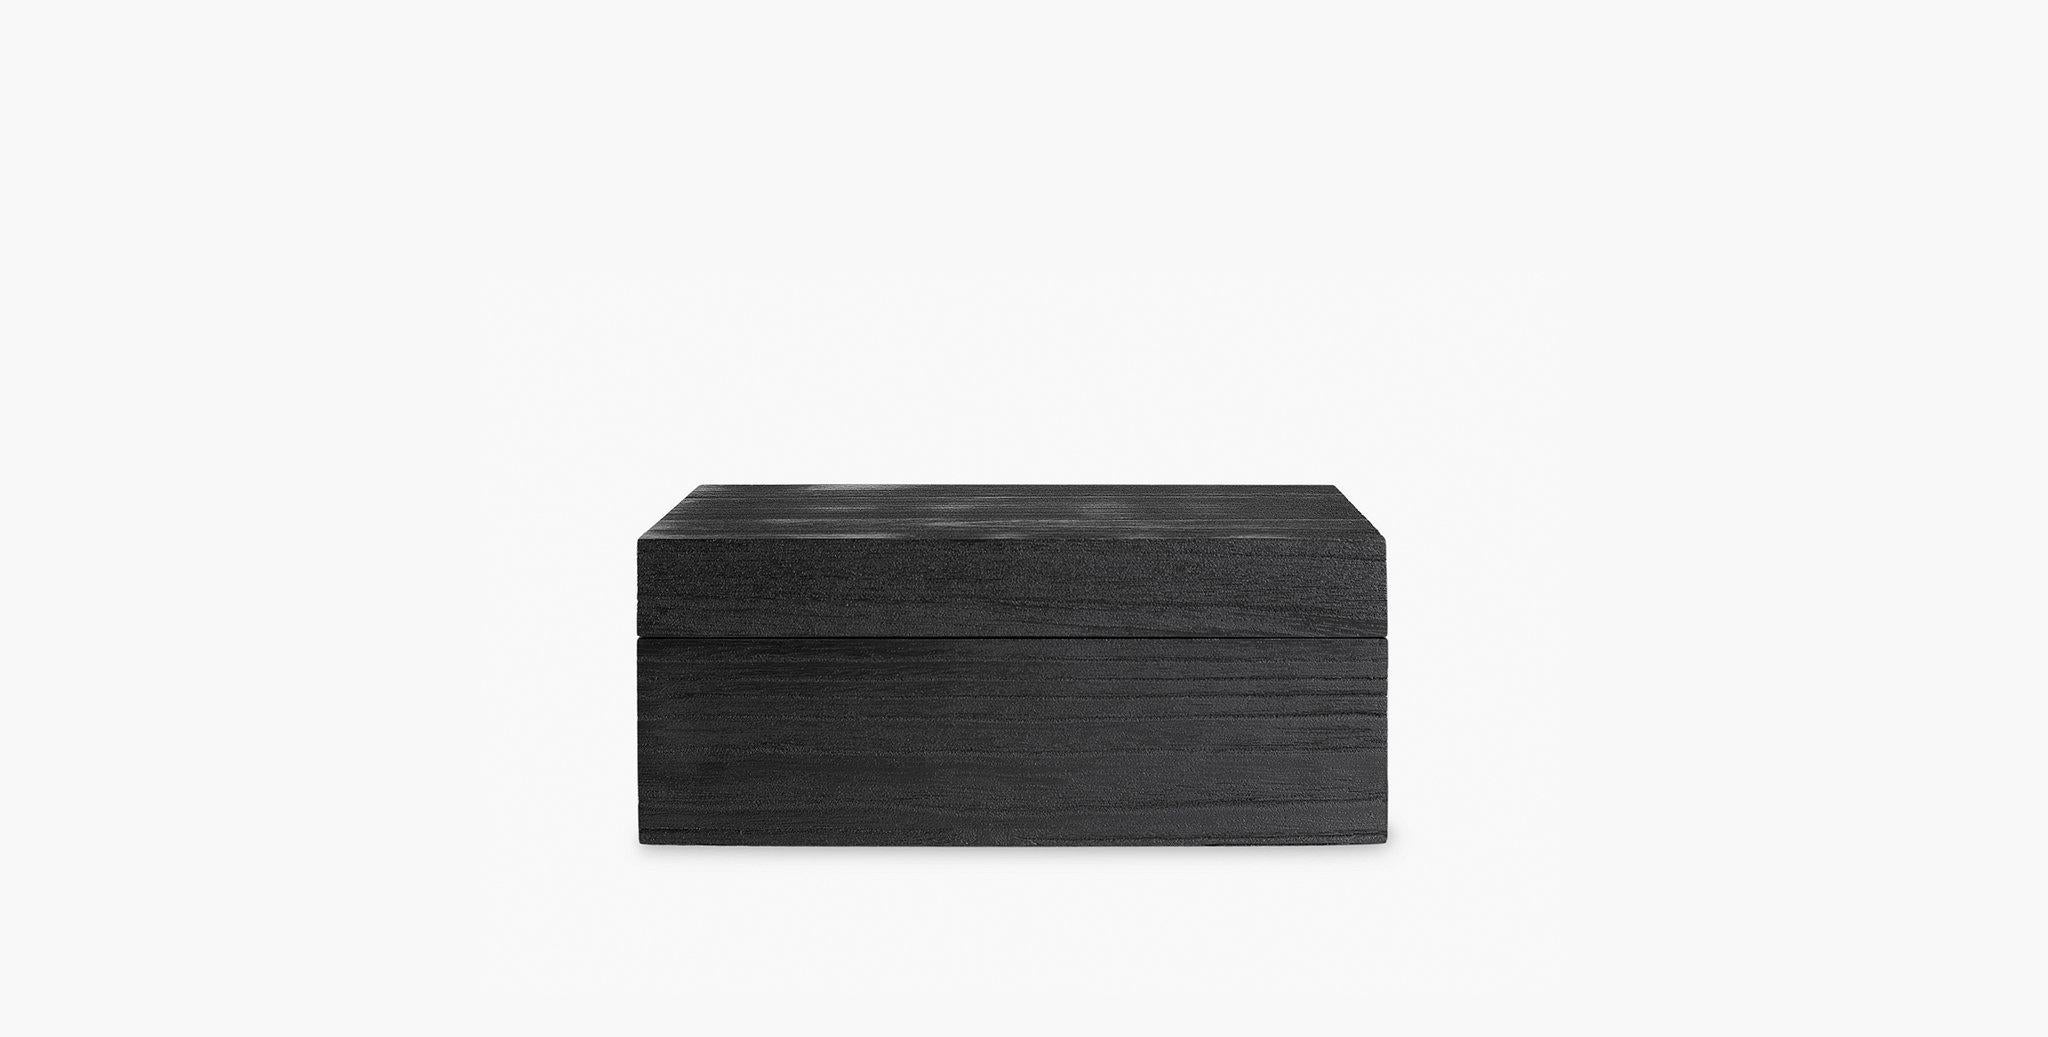 Our Monteserrat Paulowania hinged decorative boxes, are washed in a deep charcoal stain which allows the grain to be prominently highlighted, adding a subtle textural interest to your vignette. A sophisticated organizational option.

Available in 2